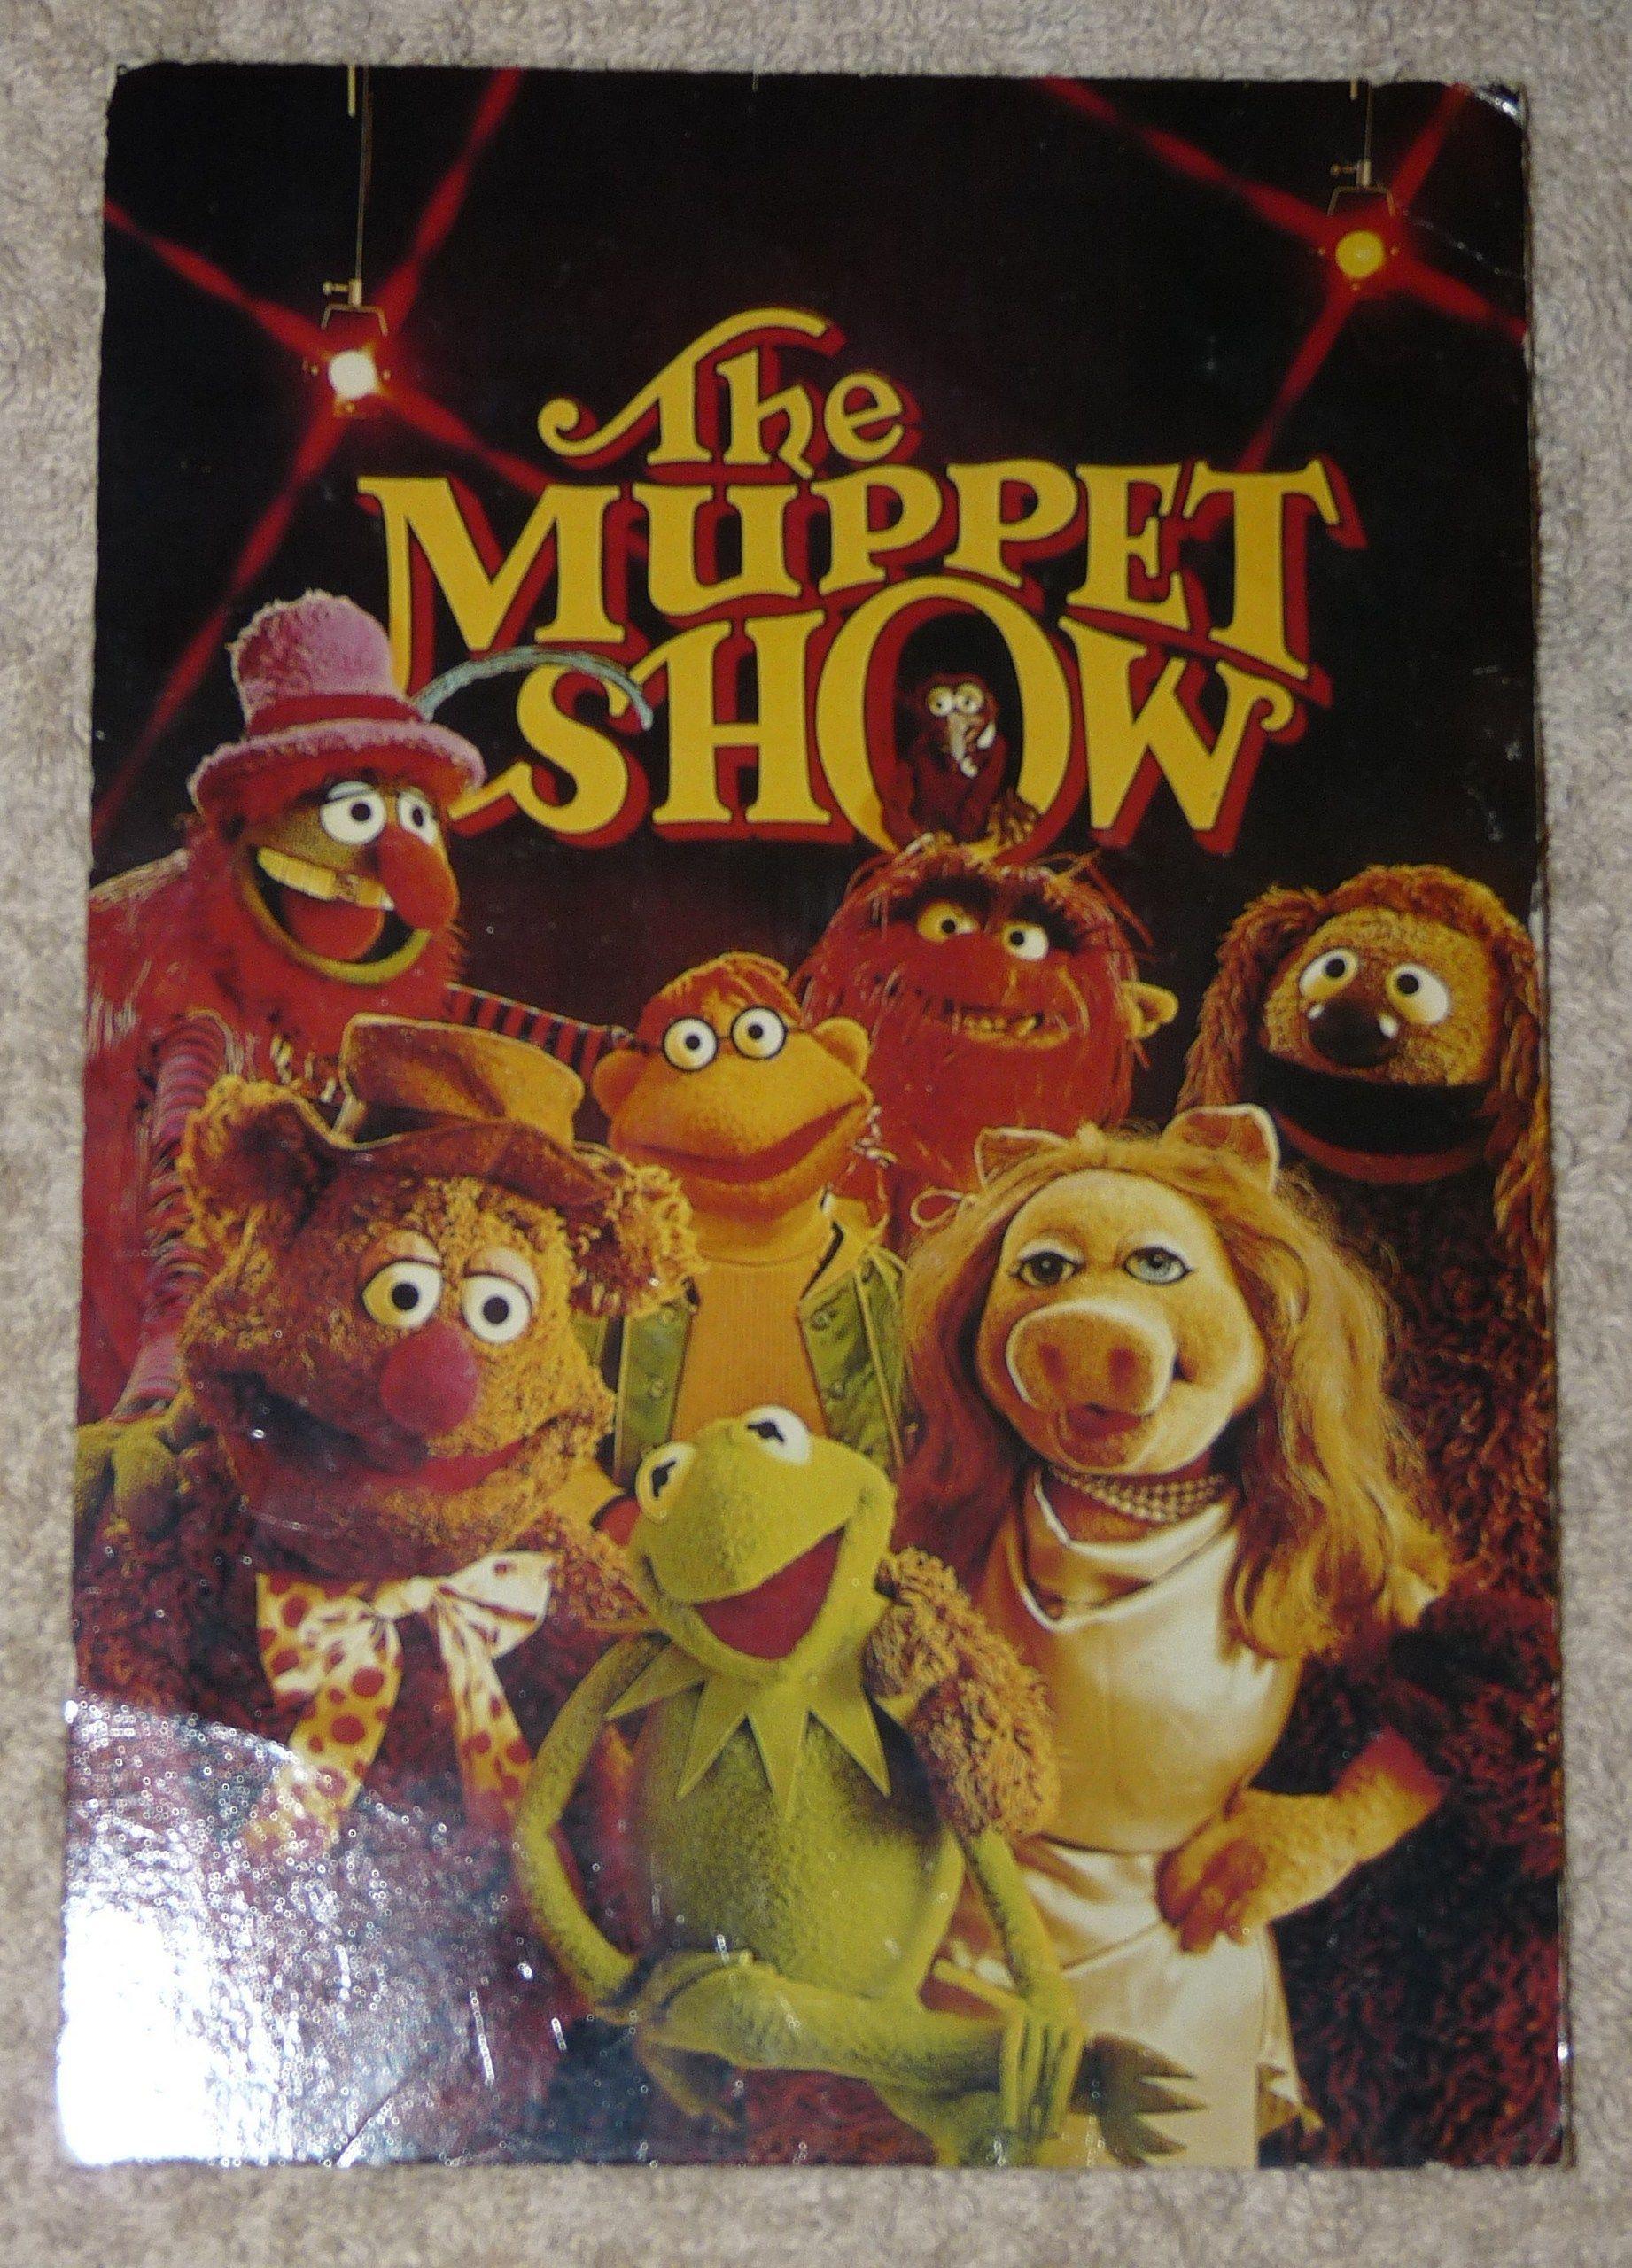 The Muppet Show image Muppet Sow Post card (personalised) HD